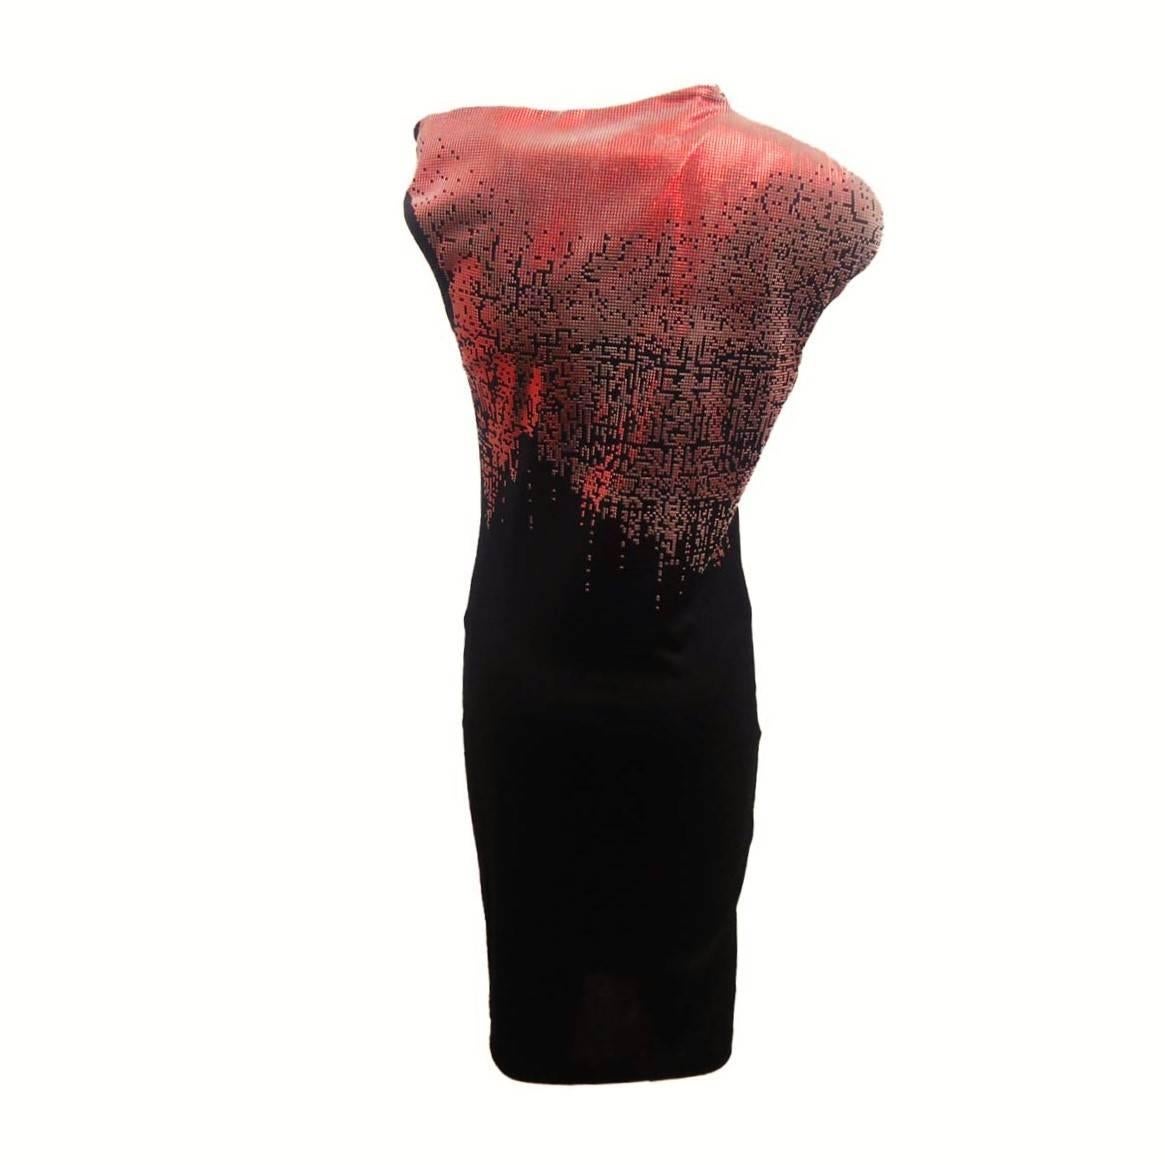 Fantastic, no words to describe this Paco Rabanne dress !
Silk
Black color
Iridescent applications (orange/red)
Asymmetrical neck
Total lenght cm 105 (41.3 inches)
Italian size 44 (US 8/10)
Worldwide express shipping included in the price !
